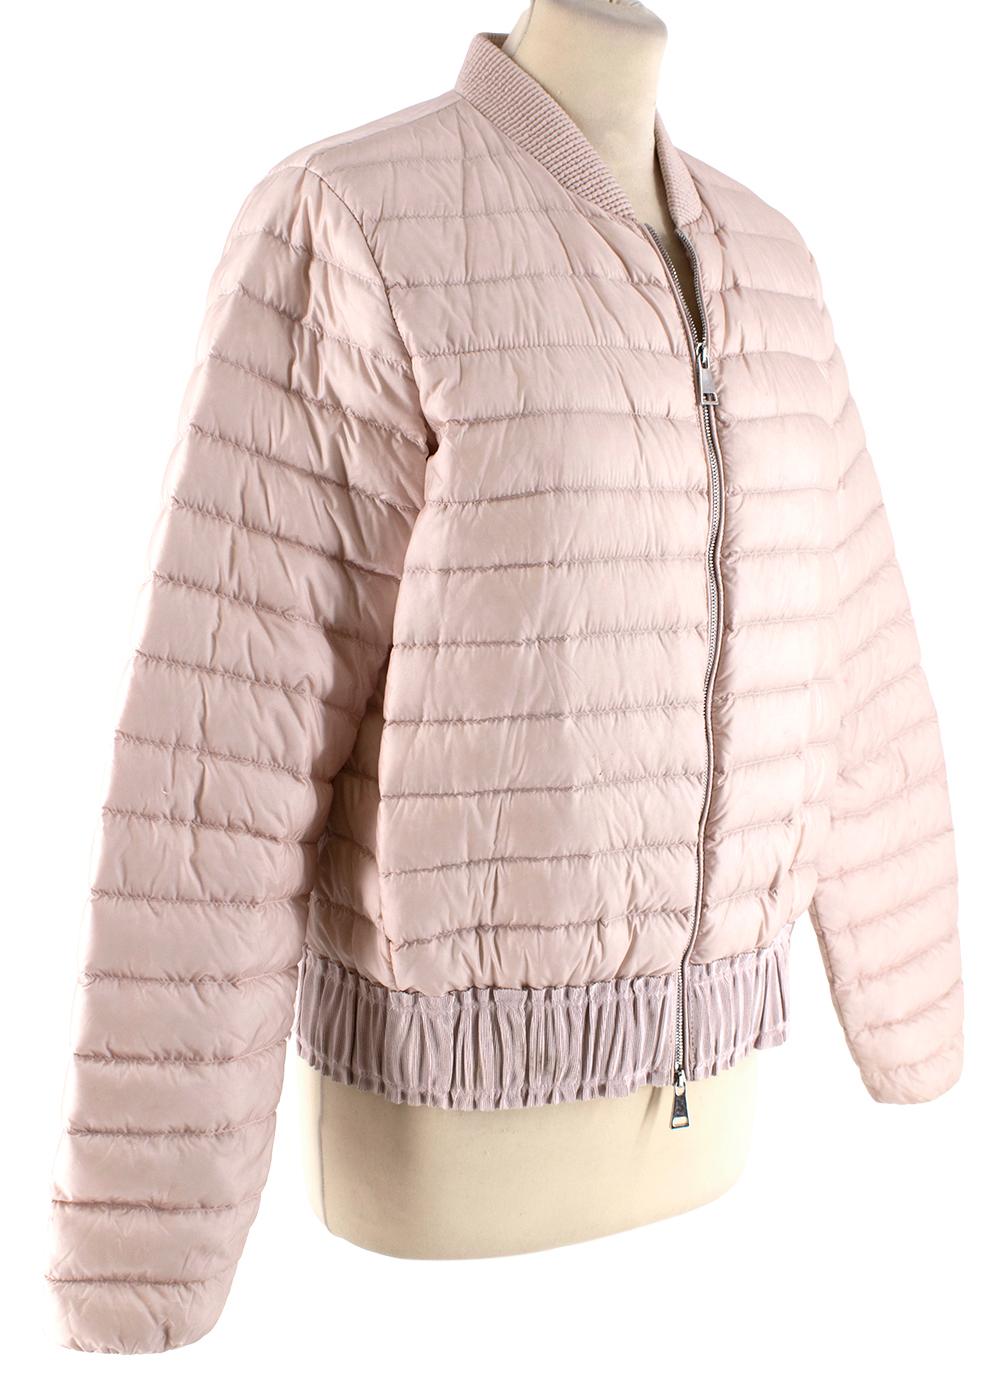 Moncler Pink Quilted Jacket

- Side slip pockets 
- Textured trims 
- Elasticated cuffs 
- Front zip fastening 
- Inside patch pockets 

Materials:
Exterior:
- 100% Nylon 
Lining:
- 100% Nylon 
Details padding:
- 100% Polyester 
Material 1:
- 50%